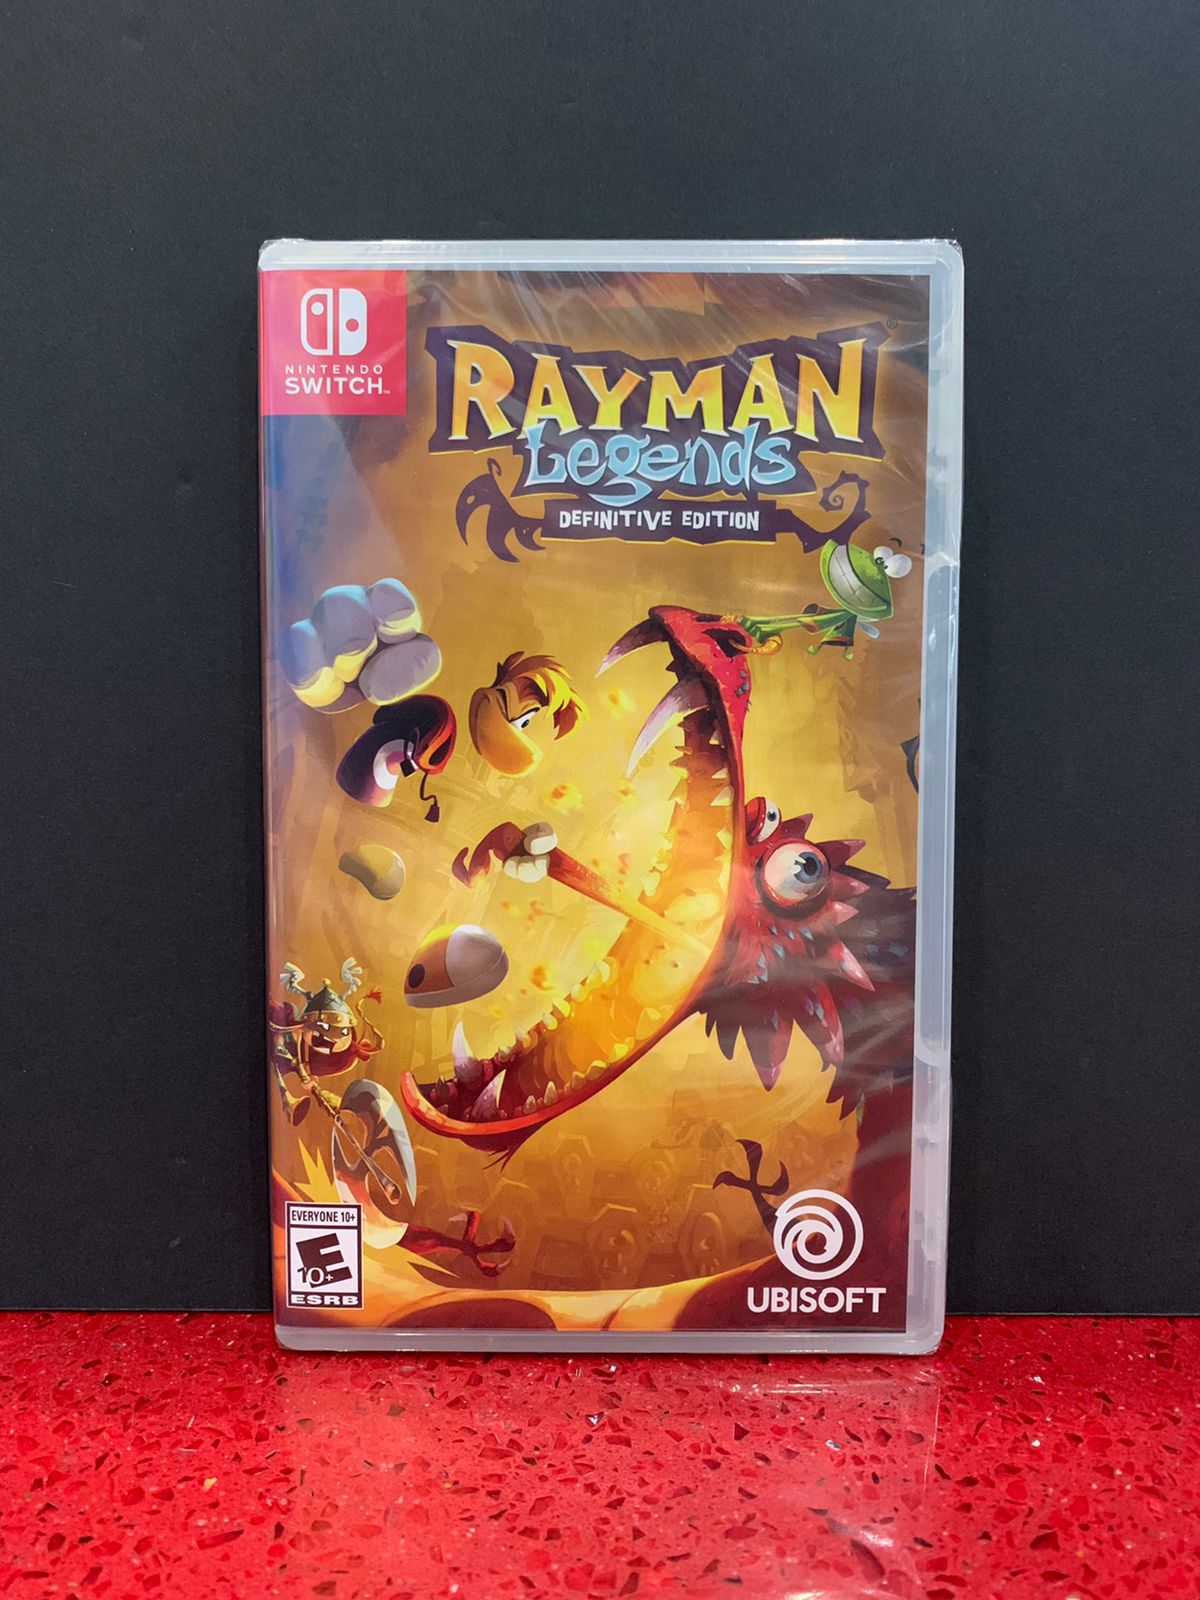 NINTENDO SWITCH RAYMAN LEGENDS DEFINITIVE EDITION 2017 FULL GAME DOWNLOAD  887256113766